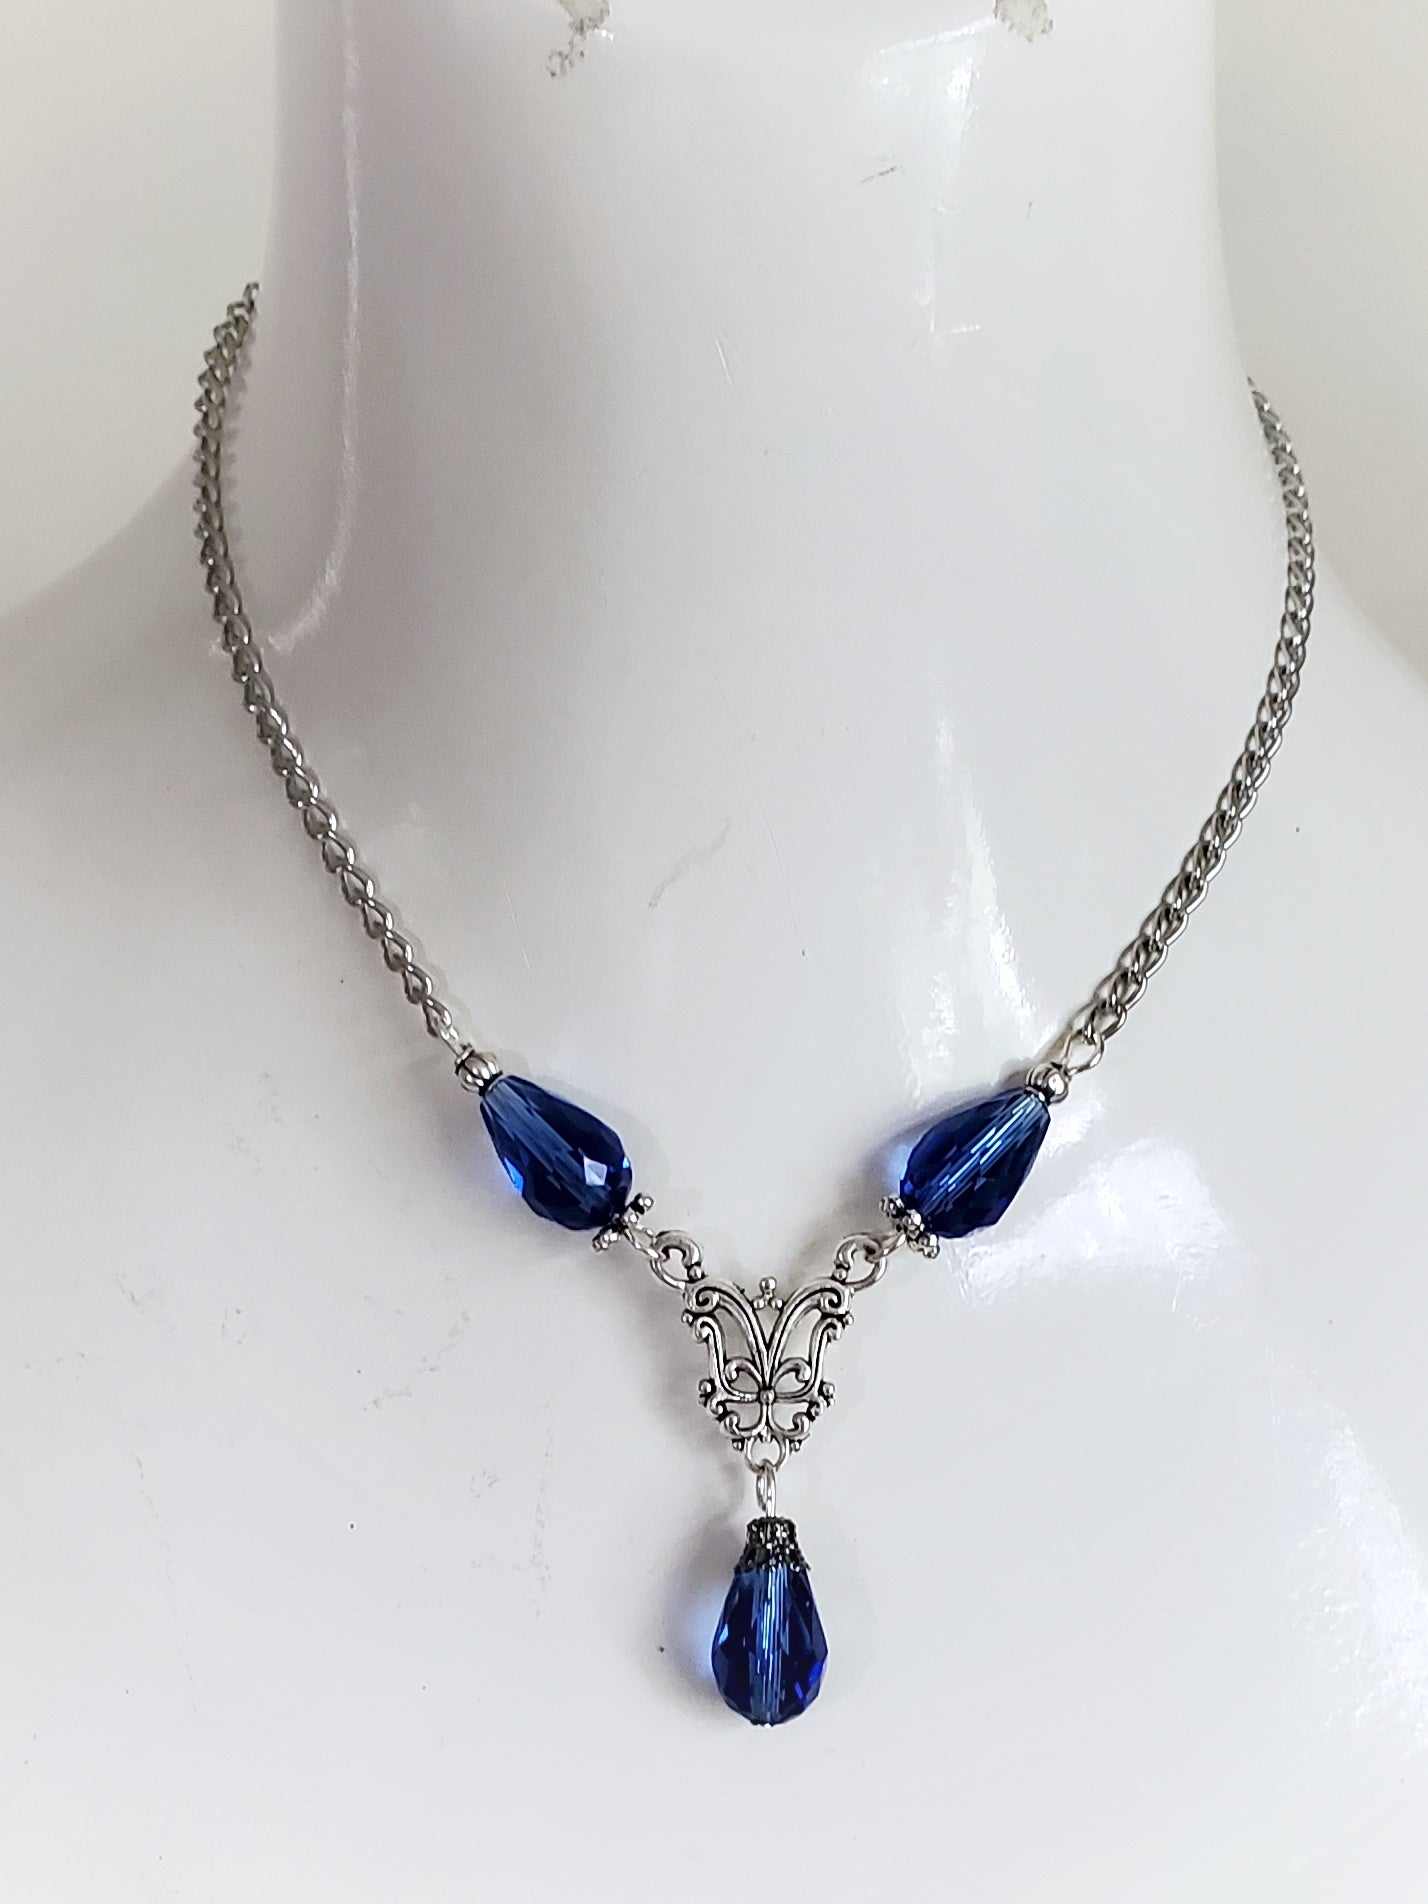 Blue Gothic Teardrop Necklace Handmade Jewelry Gift